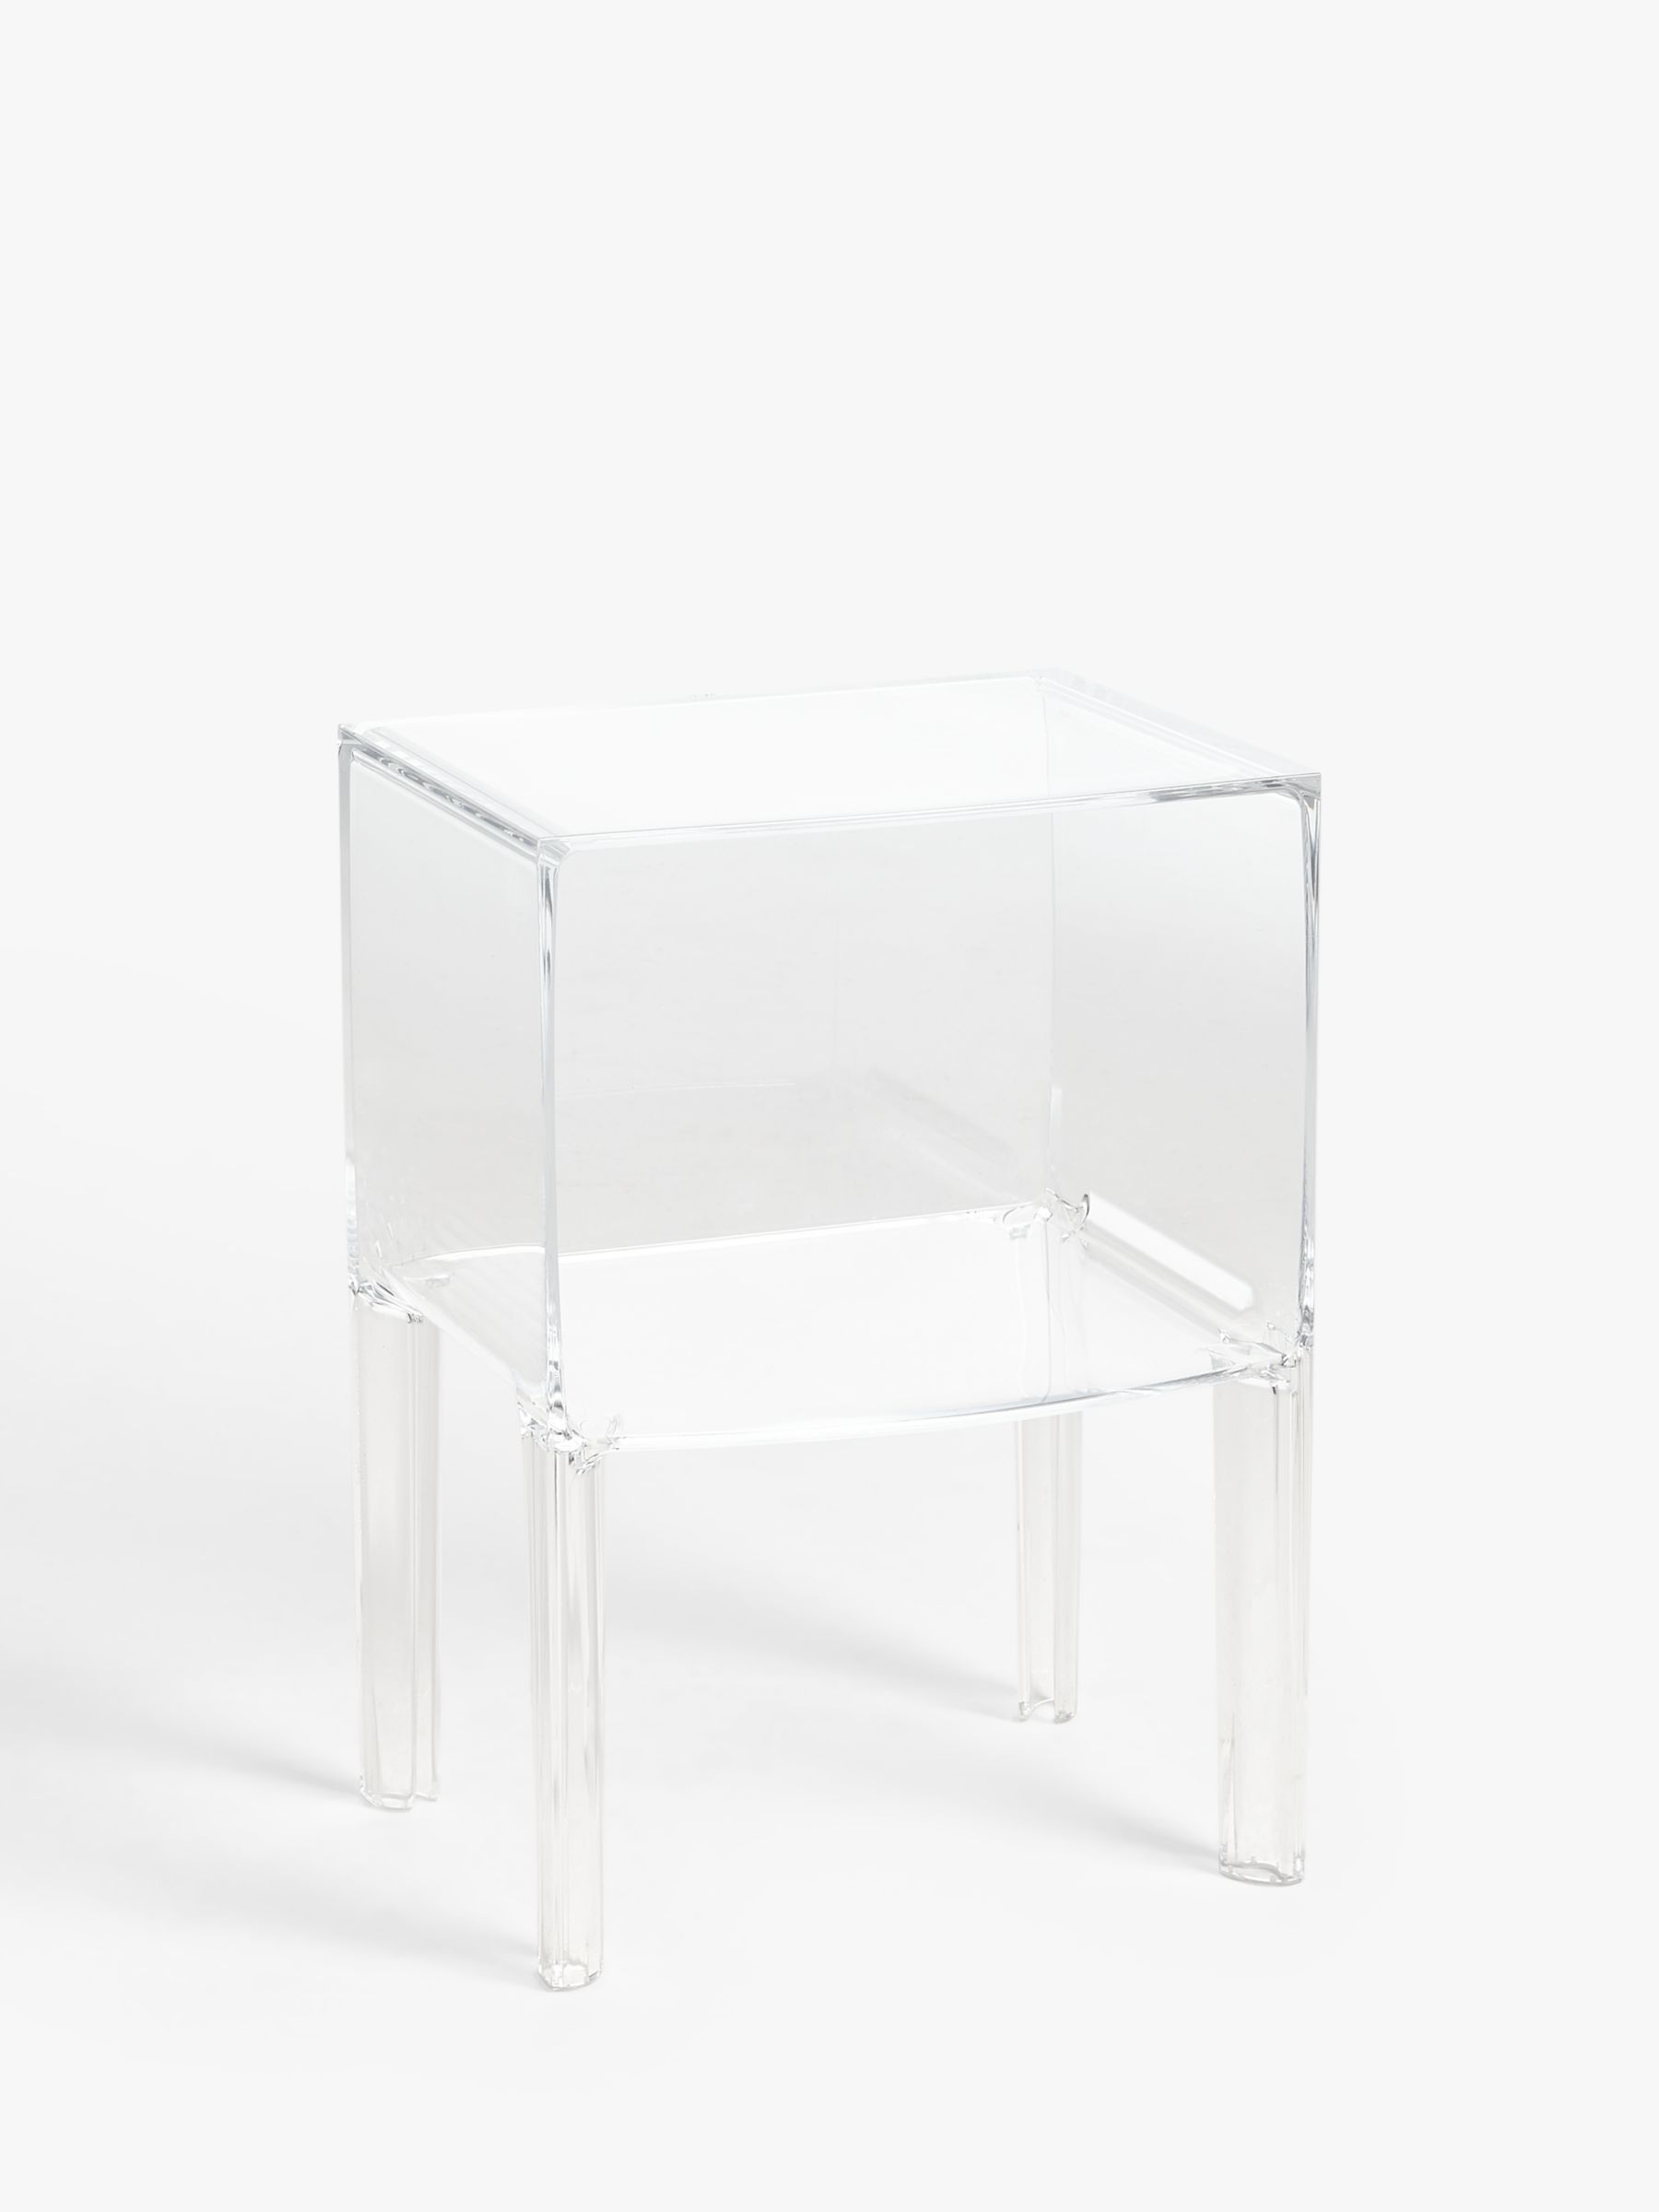 Photo of Philippe starck for kartell small ghost buster side table clear